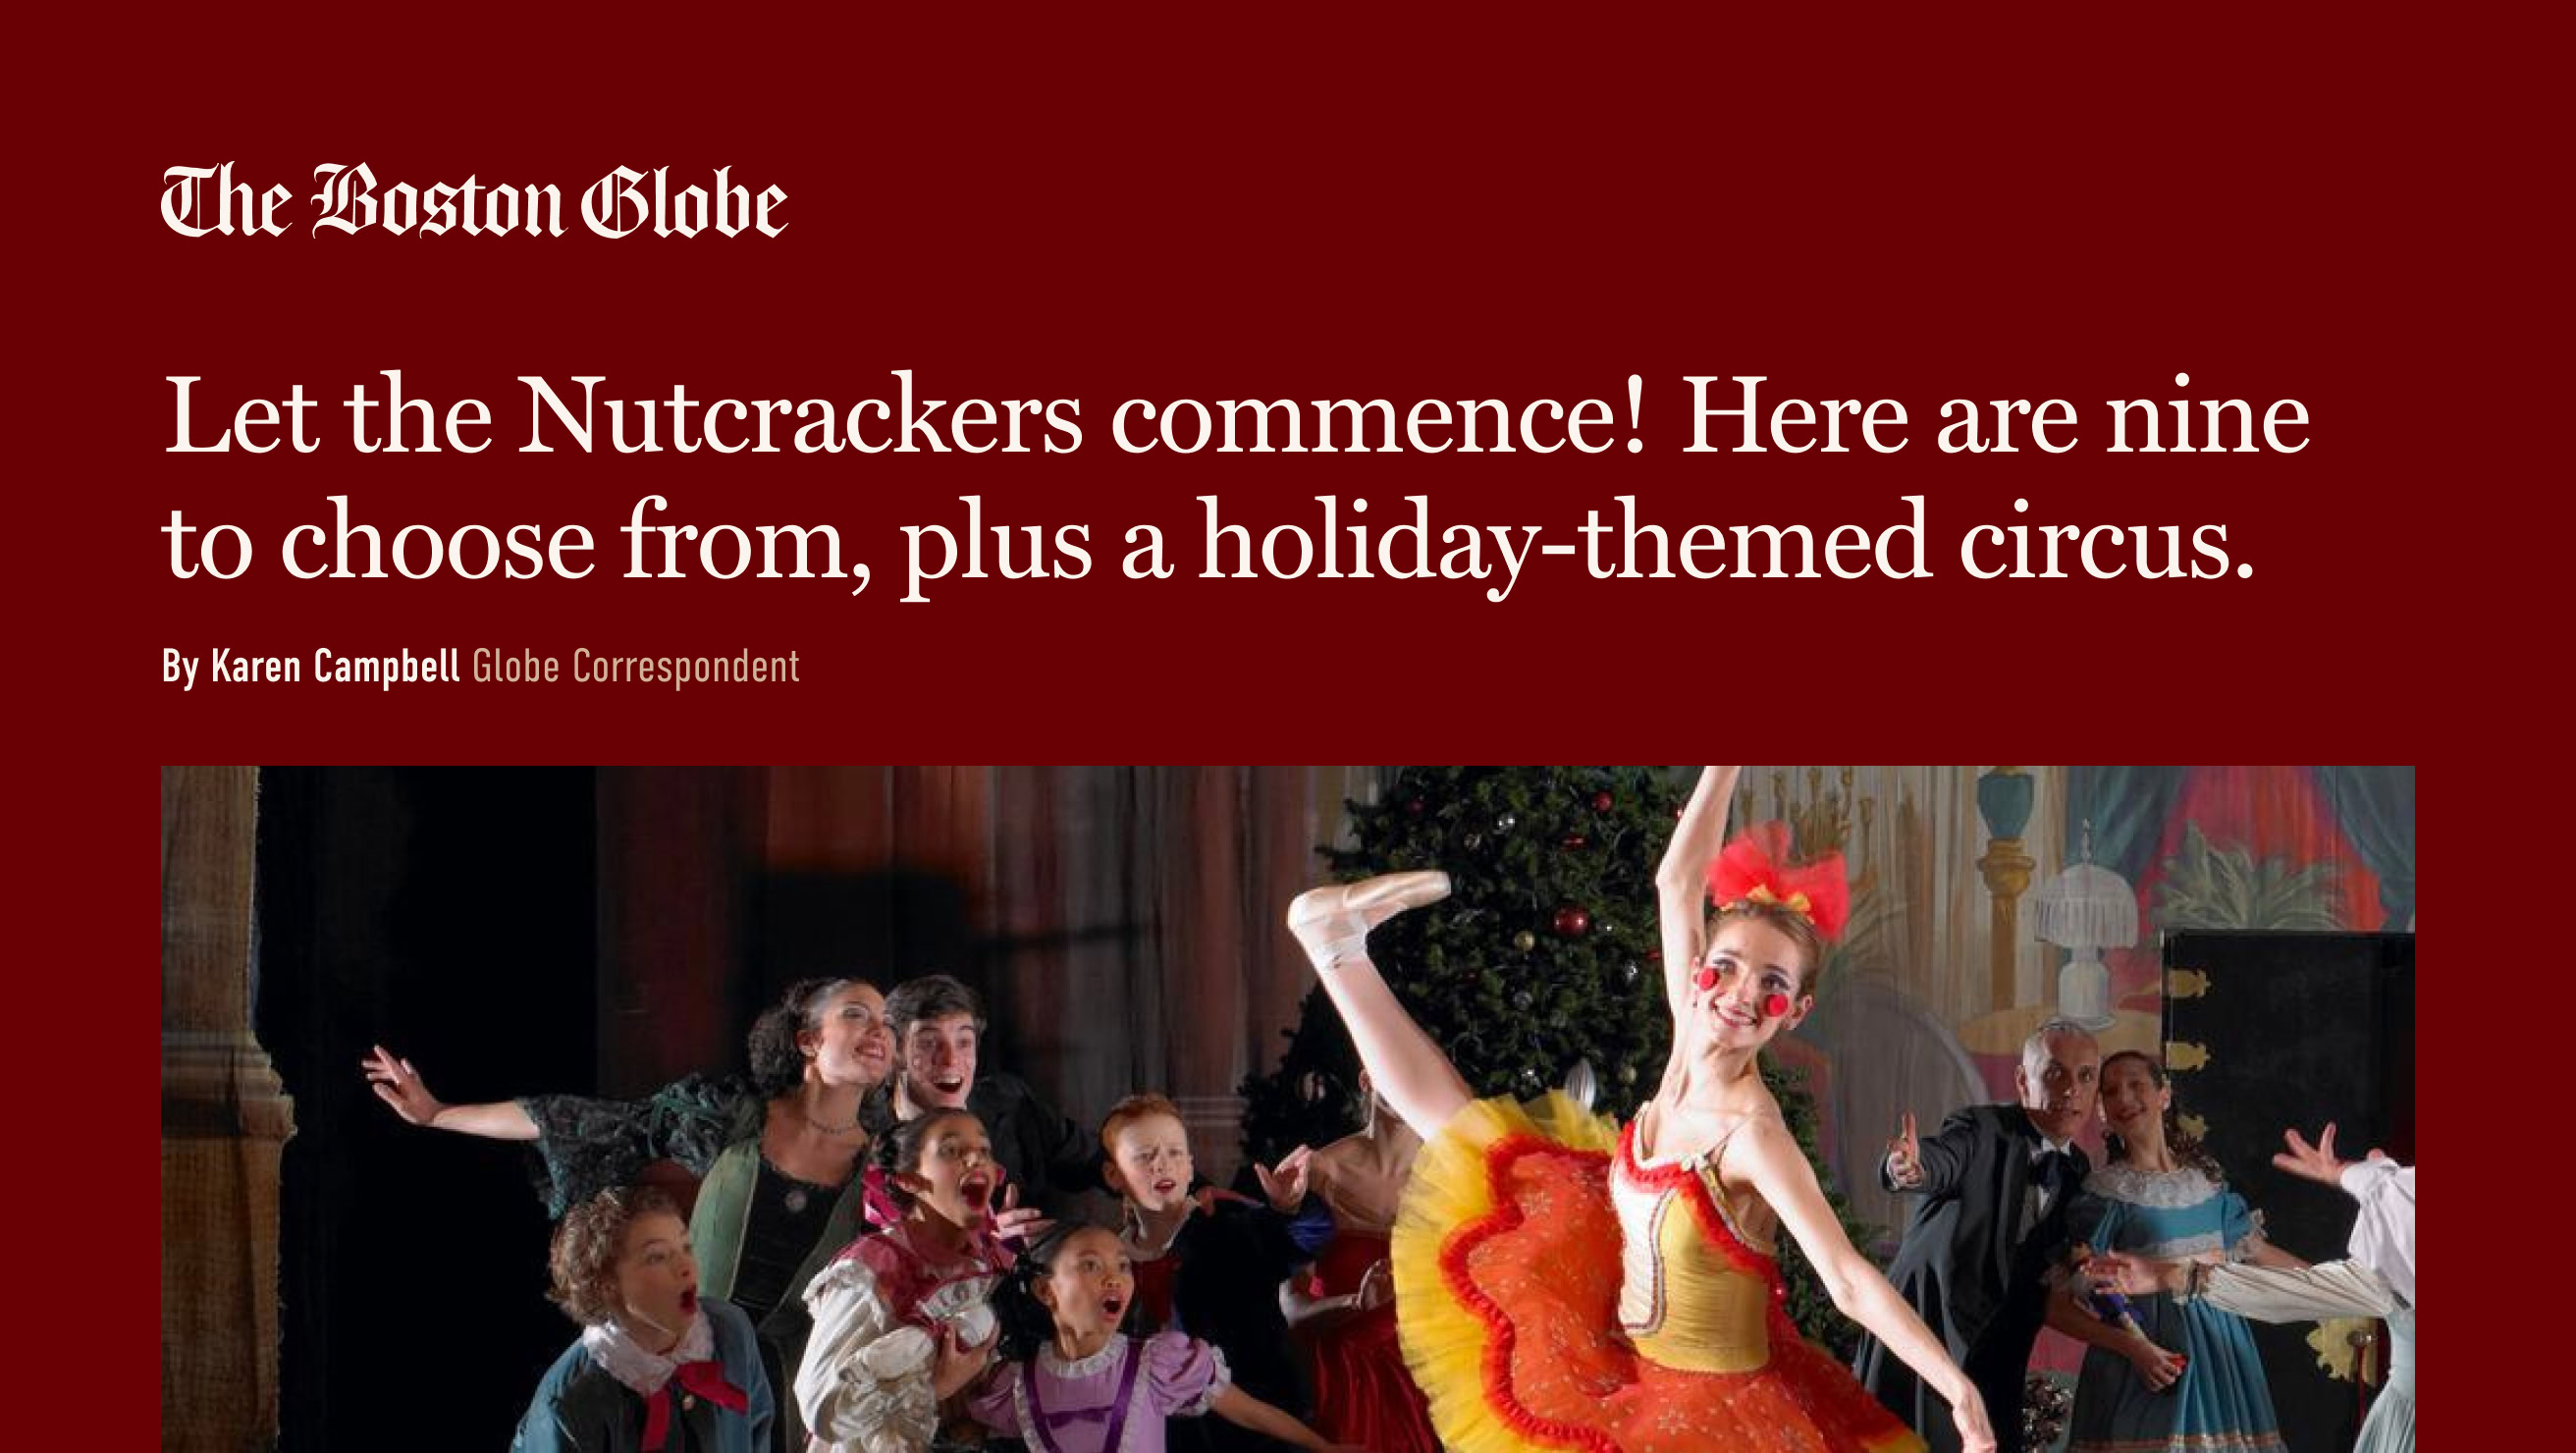 A ballet dancer in a colorful costume performing with children looking on in awe at a holiday-themed event, with The Boston Globe logo at the top.